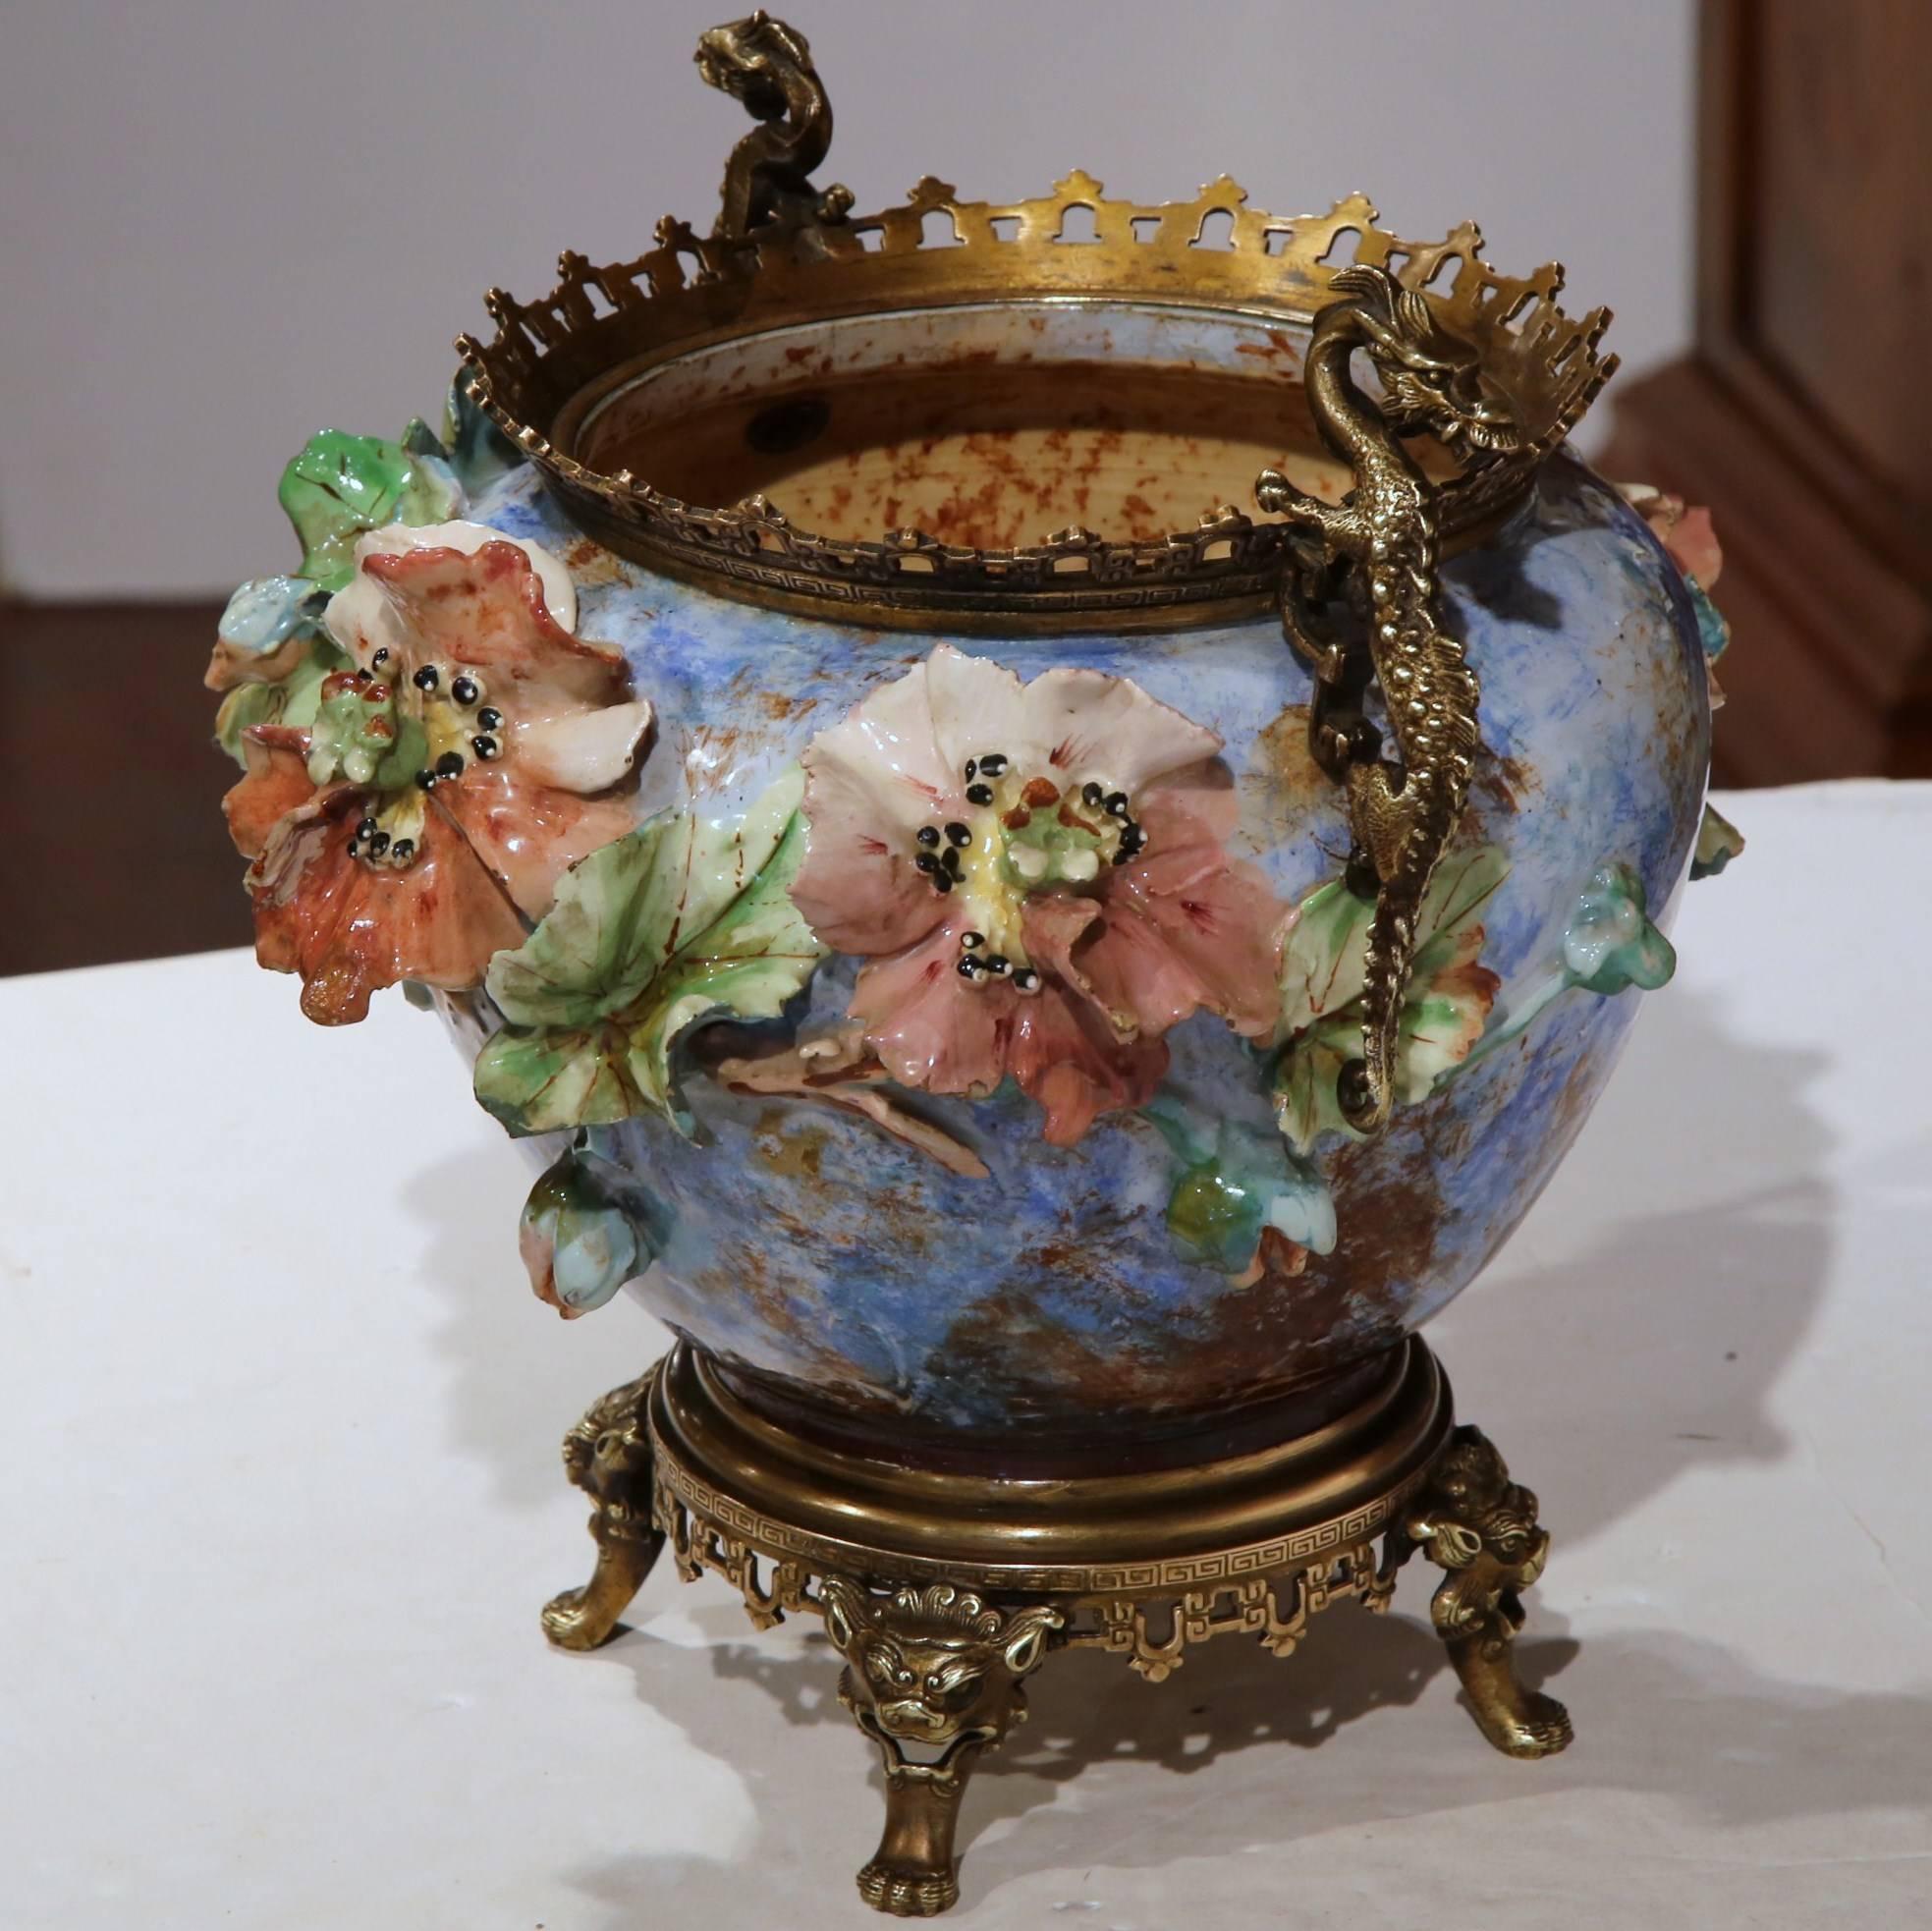 Colorful antique hand-painted Majolica cache pot from France, circa 1870. This vase has beautiful painted flowers with bronze dragons handles and base. Very good condition.